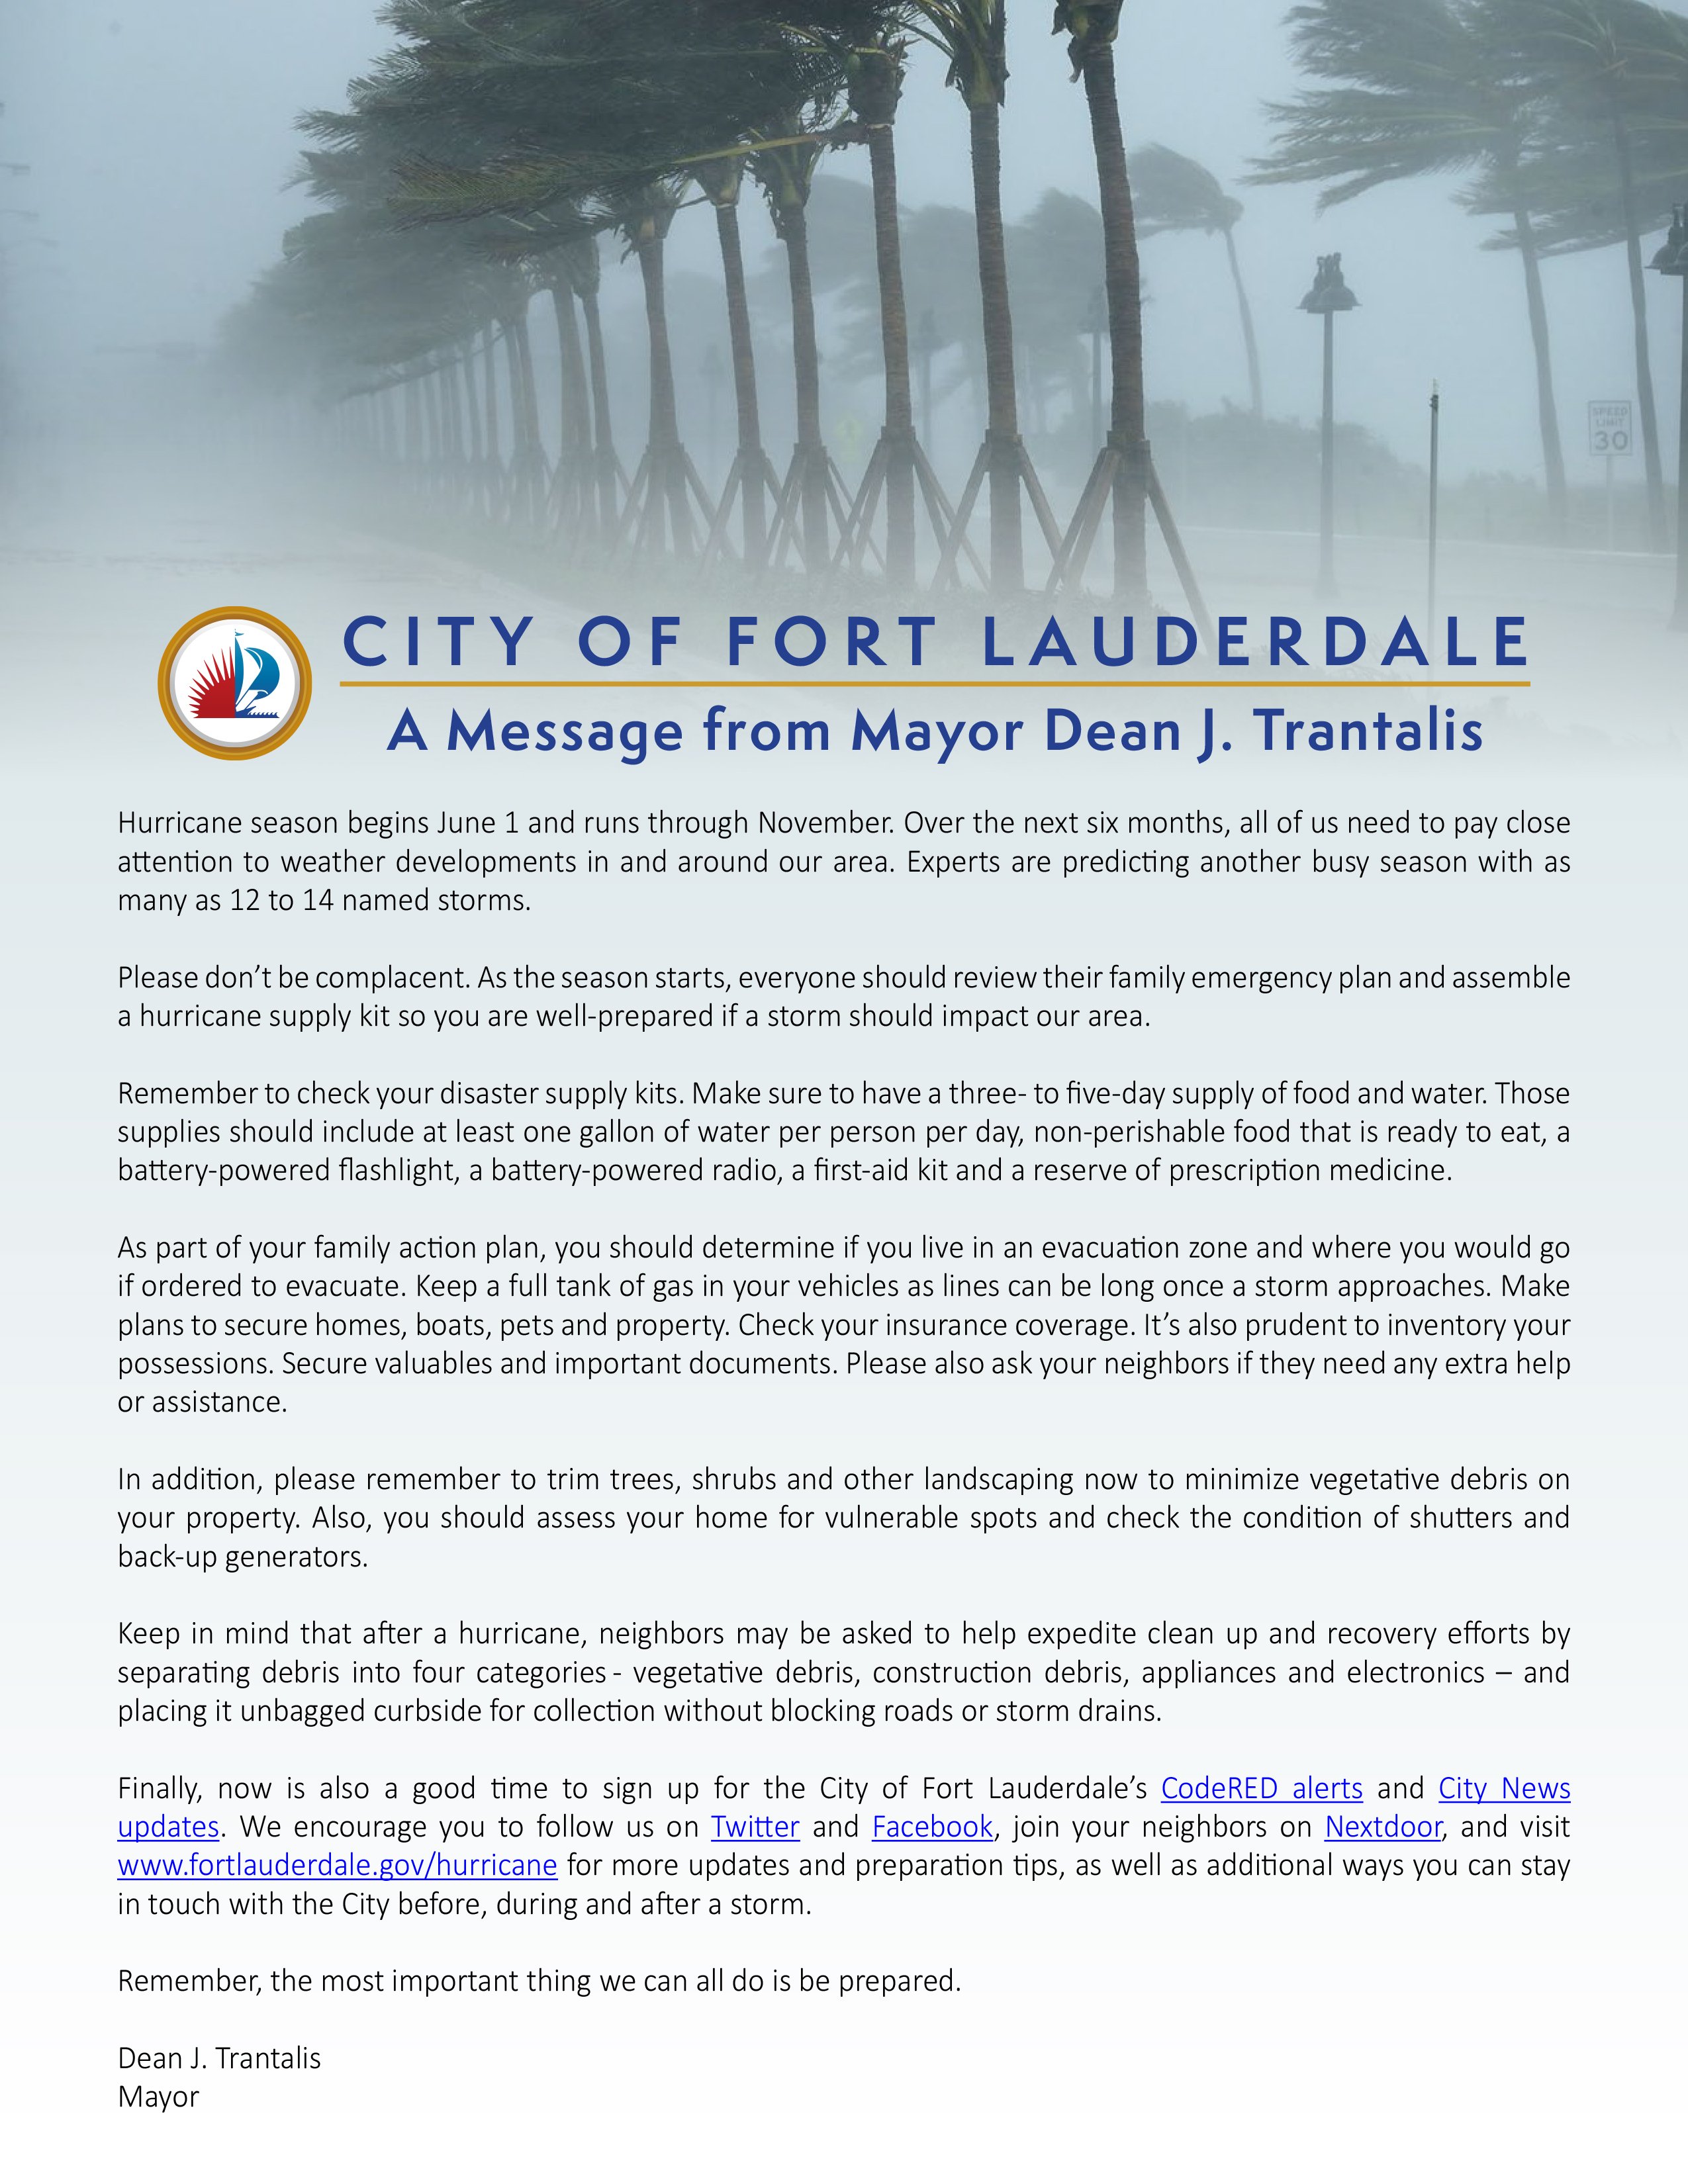 Mayor Dean J. Trantalis on Twitter: Attention all businesses